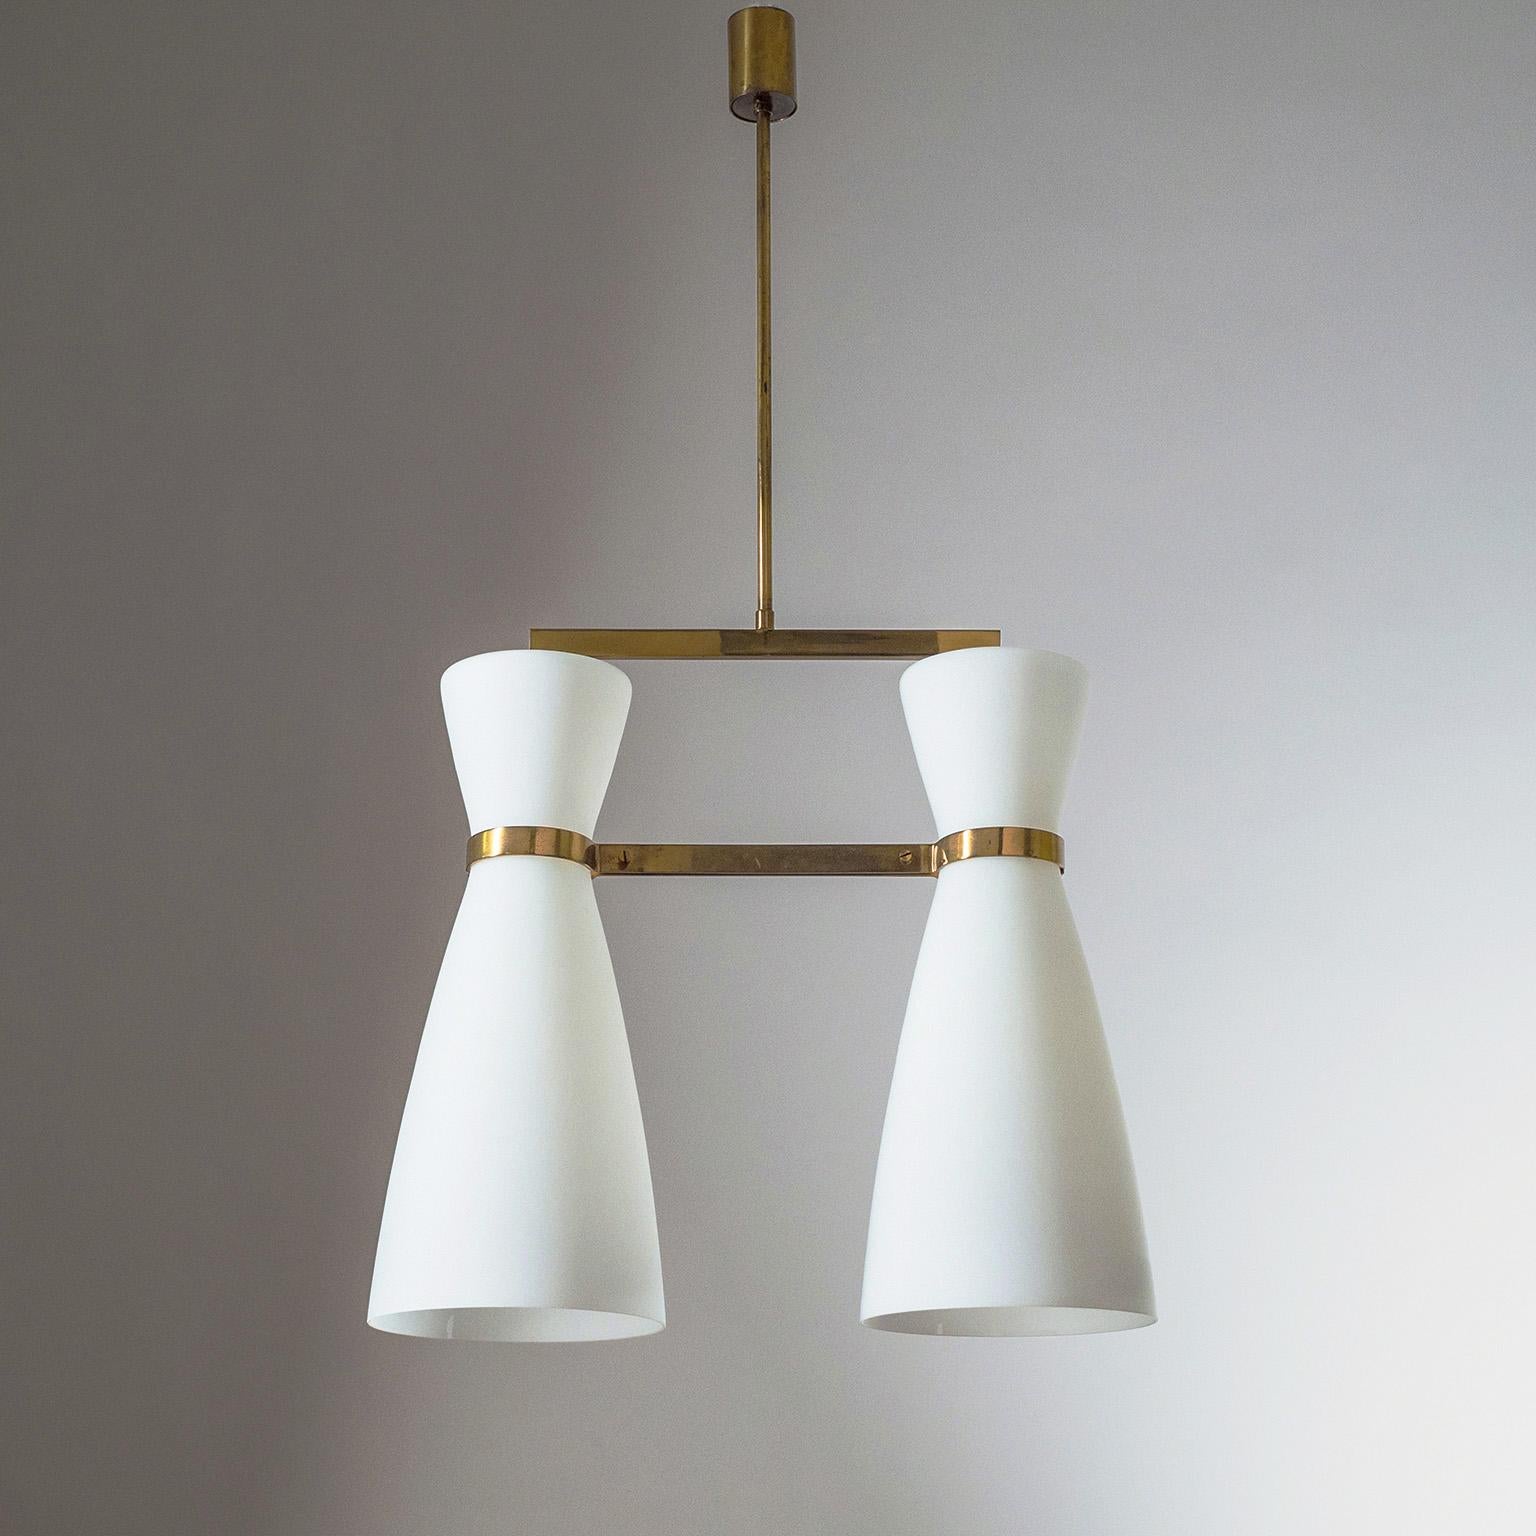 Rare modernist chandelier by Stilnovo from 1950s. Two very large (45cm/18″) tapered satin glass diffusers are suspended by a minimal polished brass structure. Original brass and ceramic E27 socket with new wiring. Original manufacturer’s label.